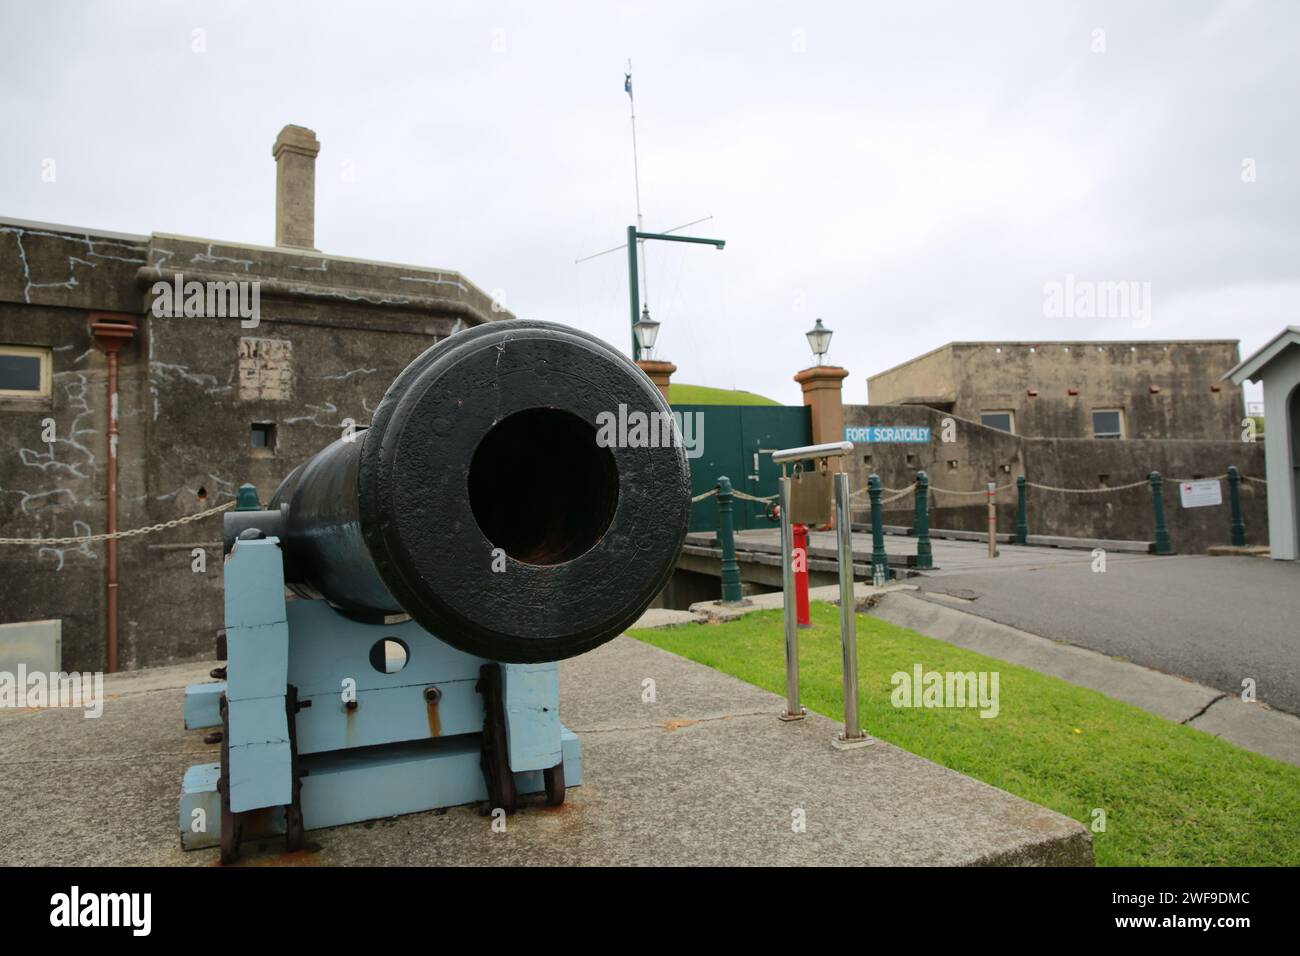 Fort Scratchley Foto Stock